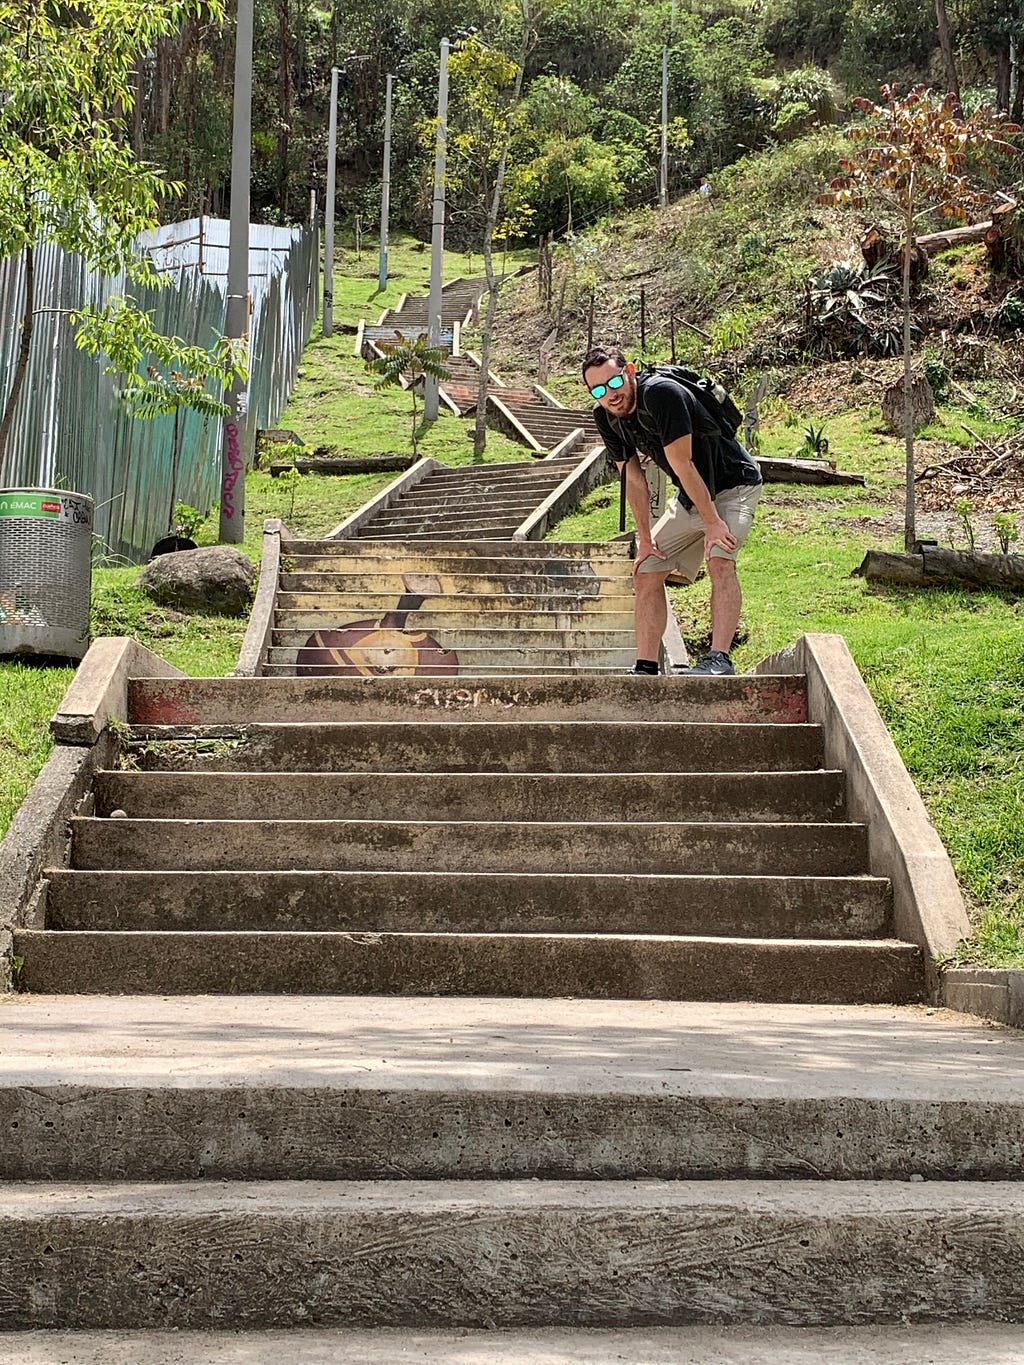 Brandon resting on the steep steps leading to the Mirador in Cuenca, Ecuador.